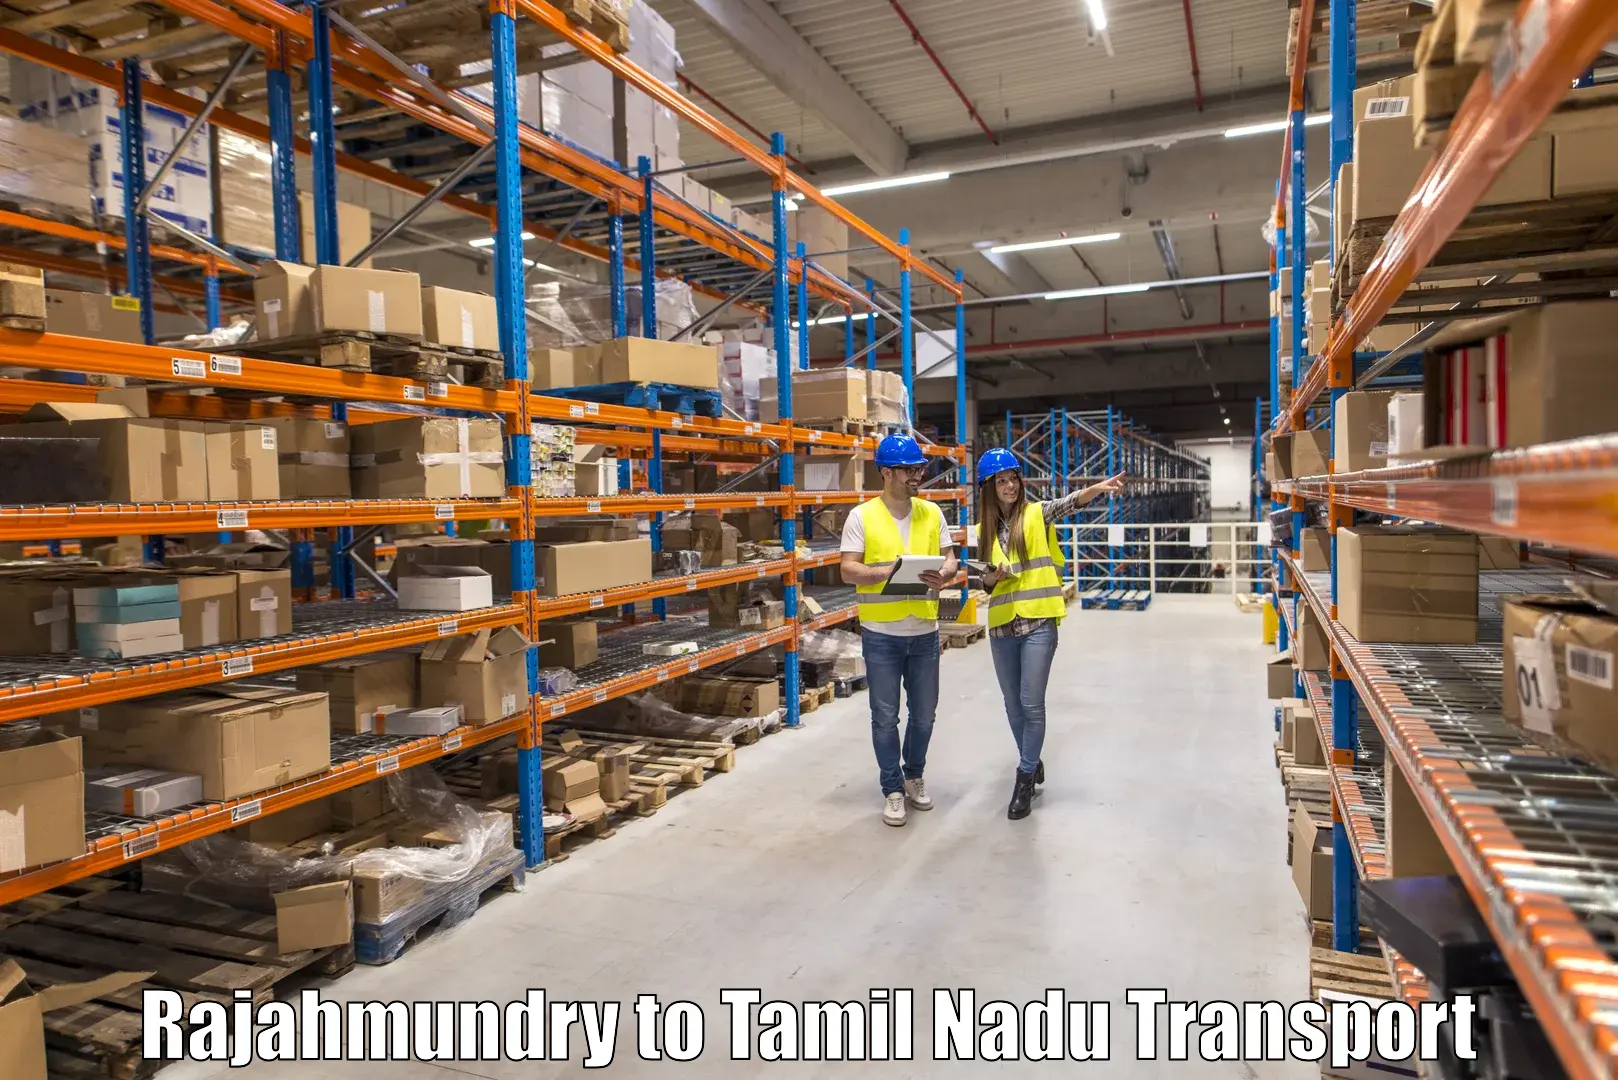 Nearby transport service Rajahmundry to Vellore Institute of Technology